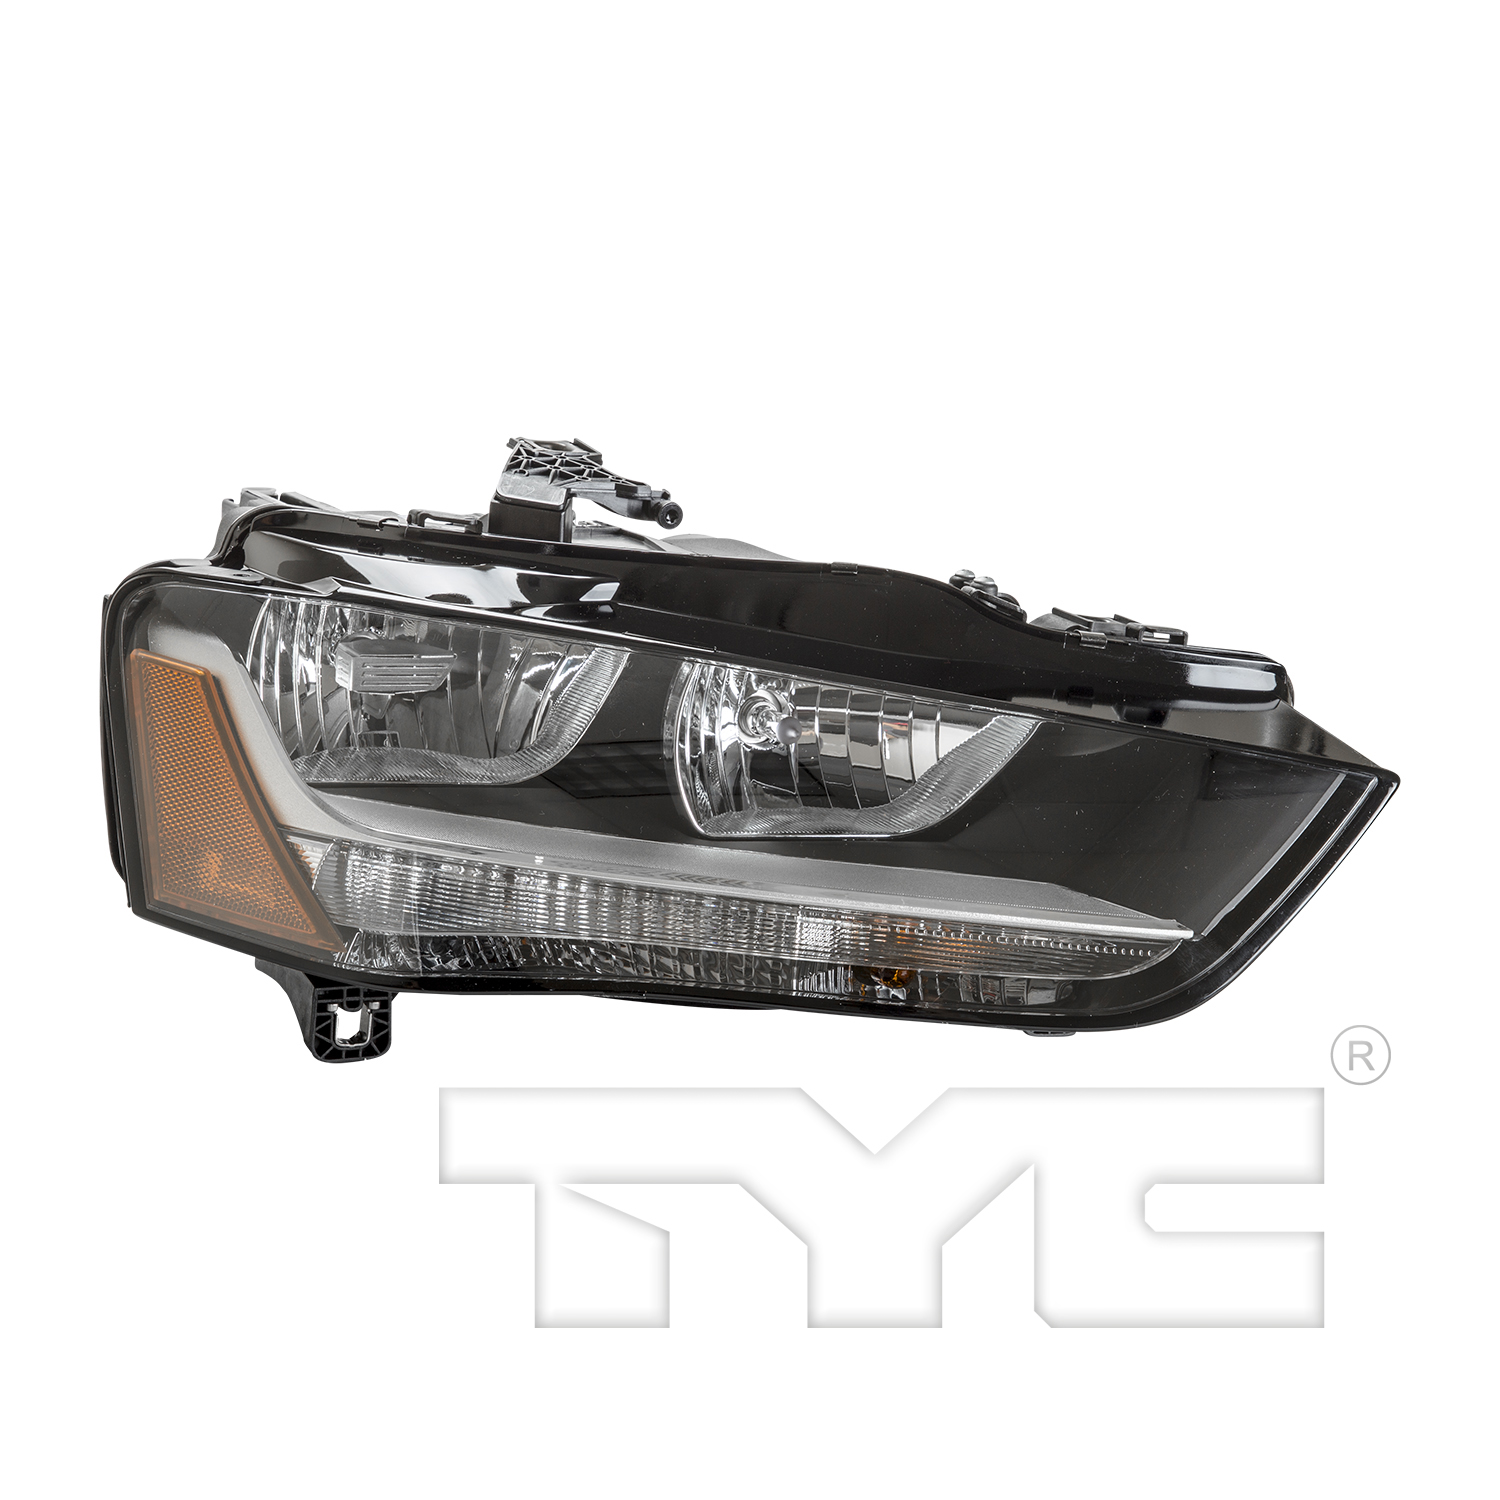 Aftermarket HEADLIGHTS for AUDI - ALLROAD, ALLROAD,13-14,RT Headlamp assy composite